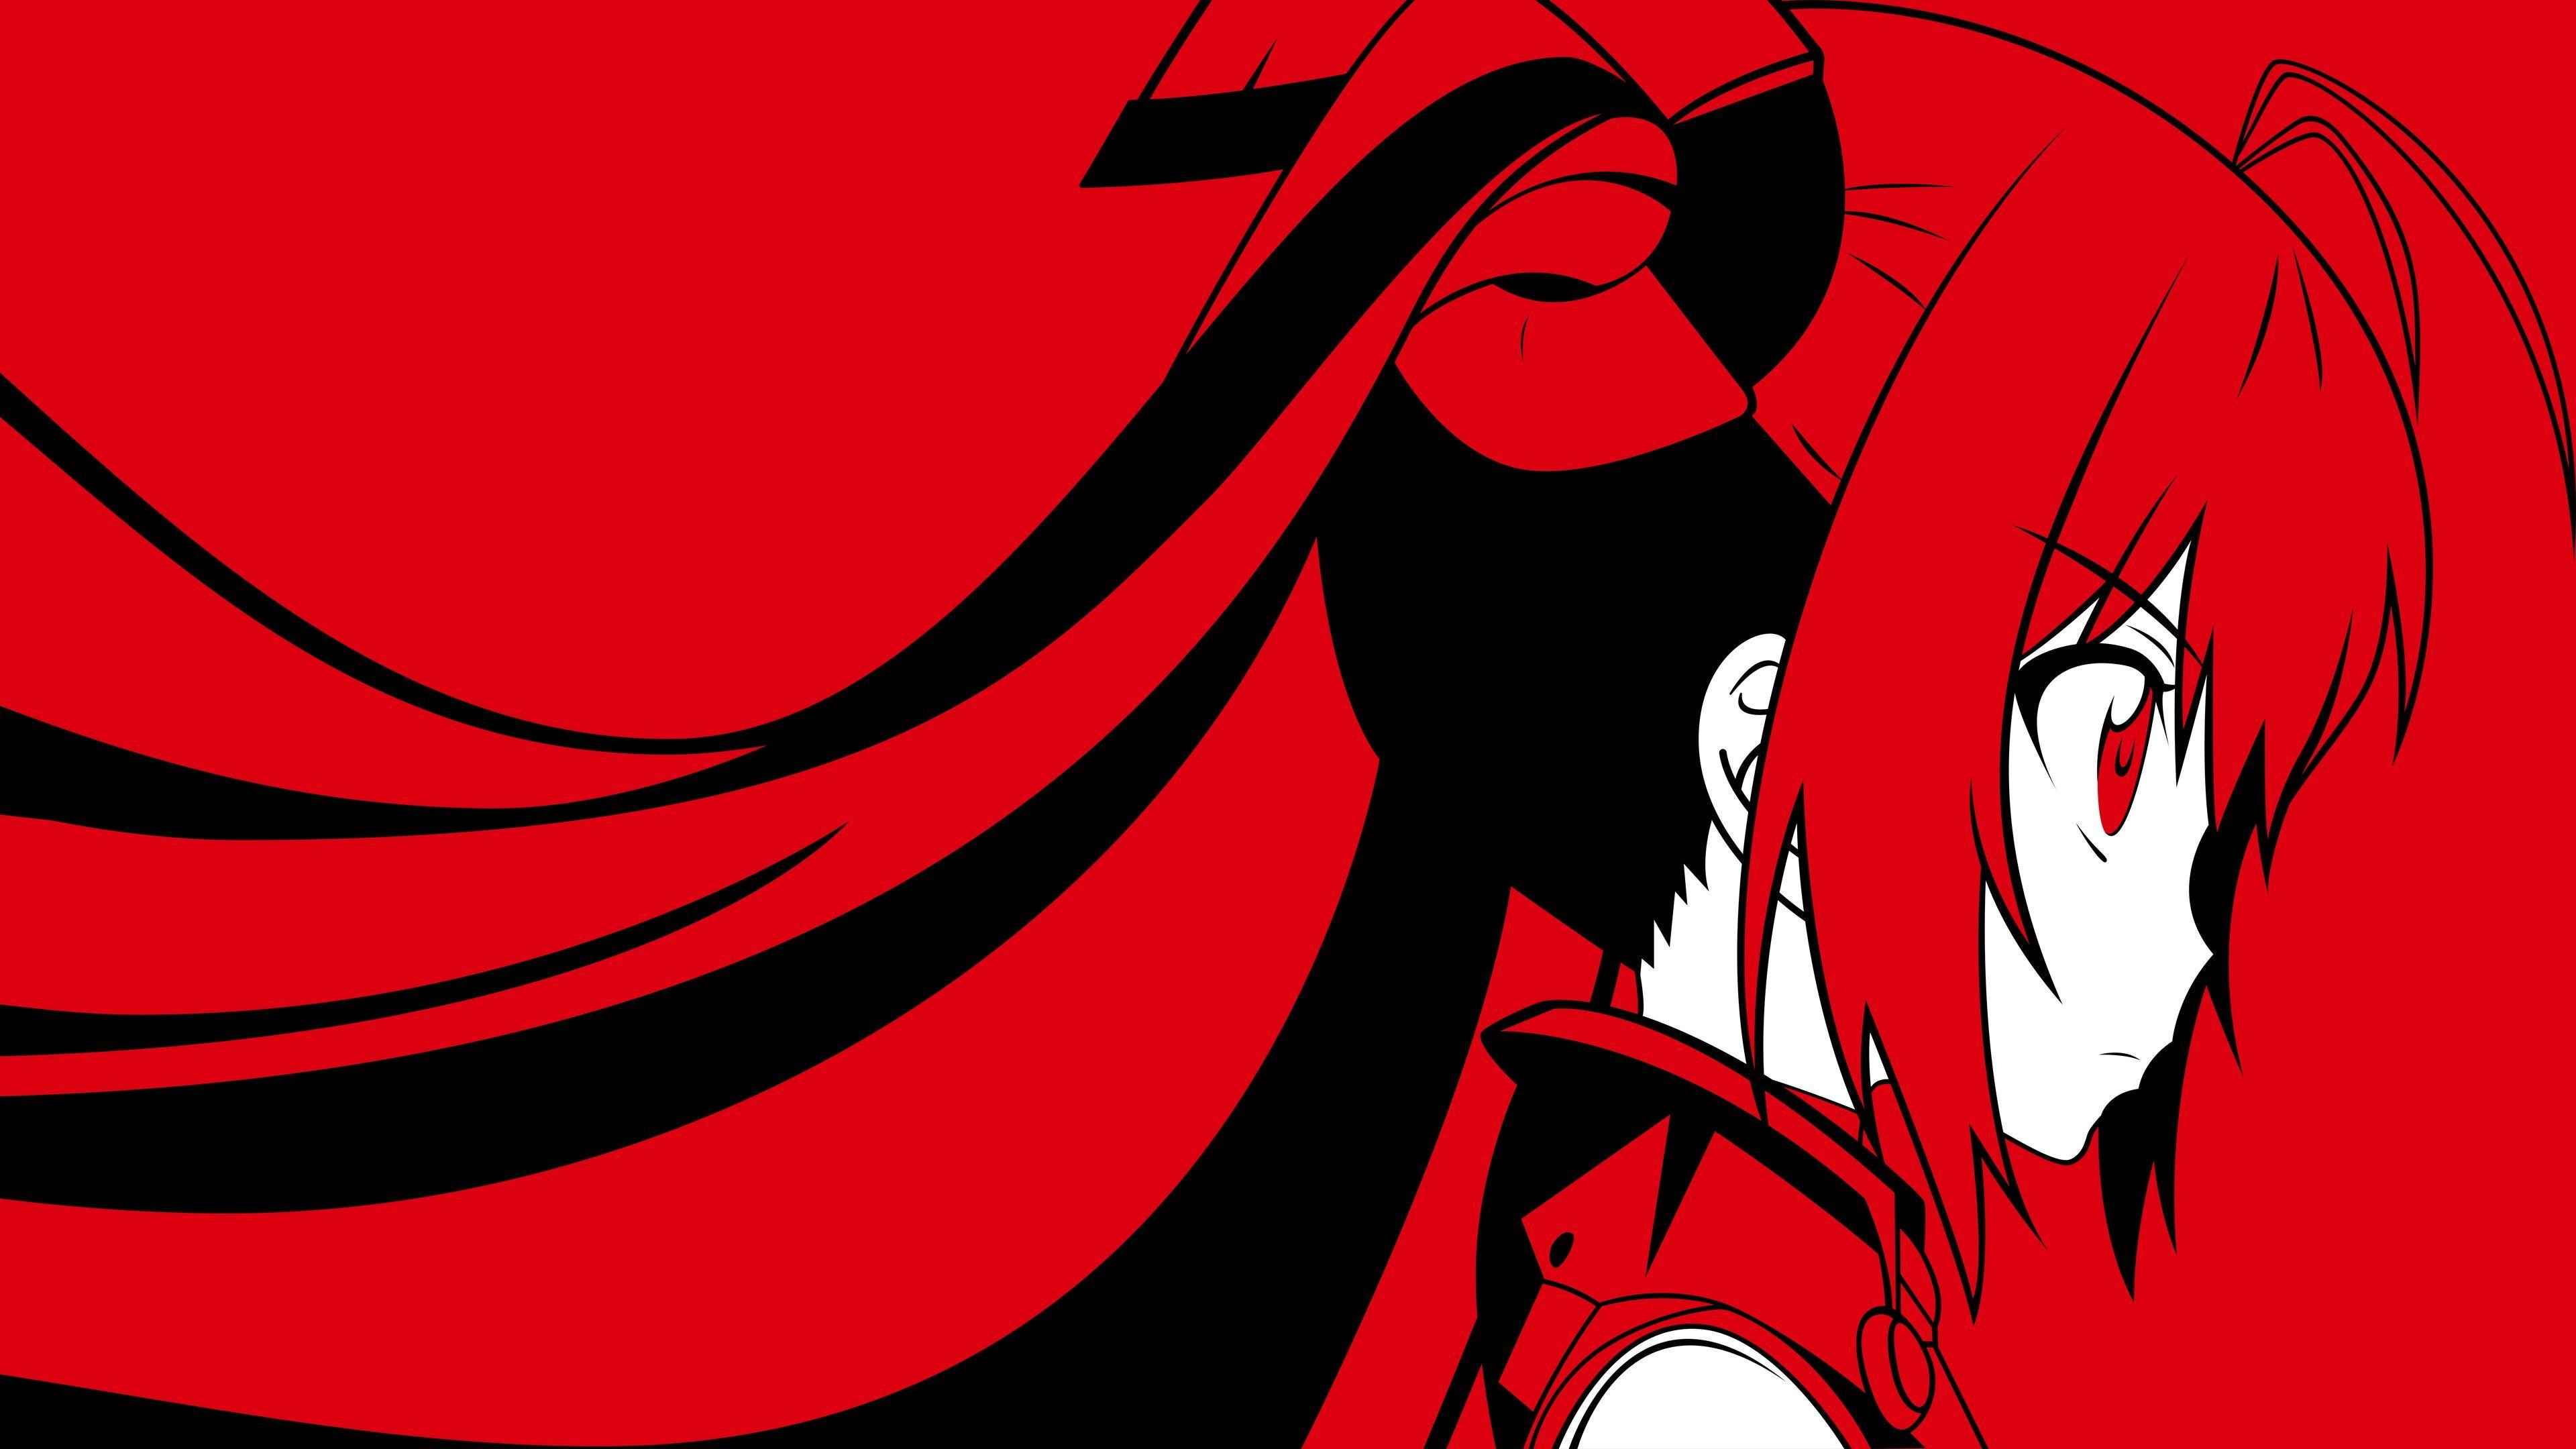 Anime Red 4K Wallpapers - Top Free Anime Red 4K Backgrounds ...